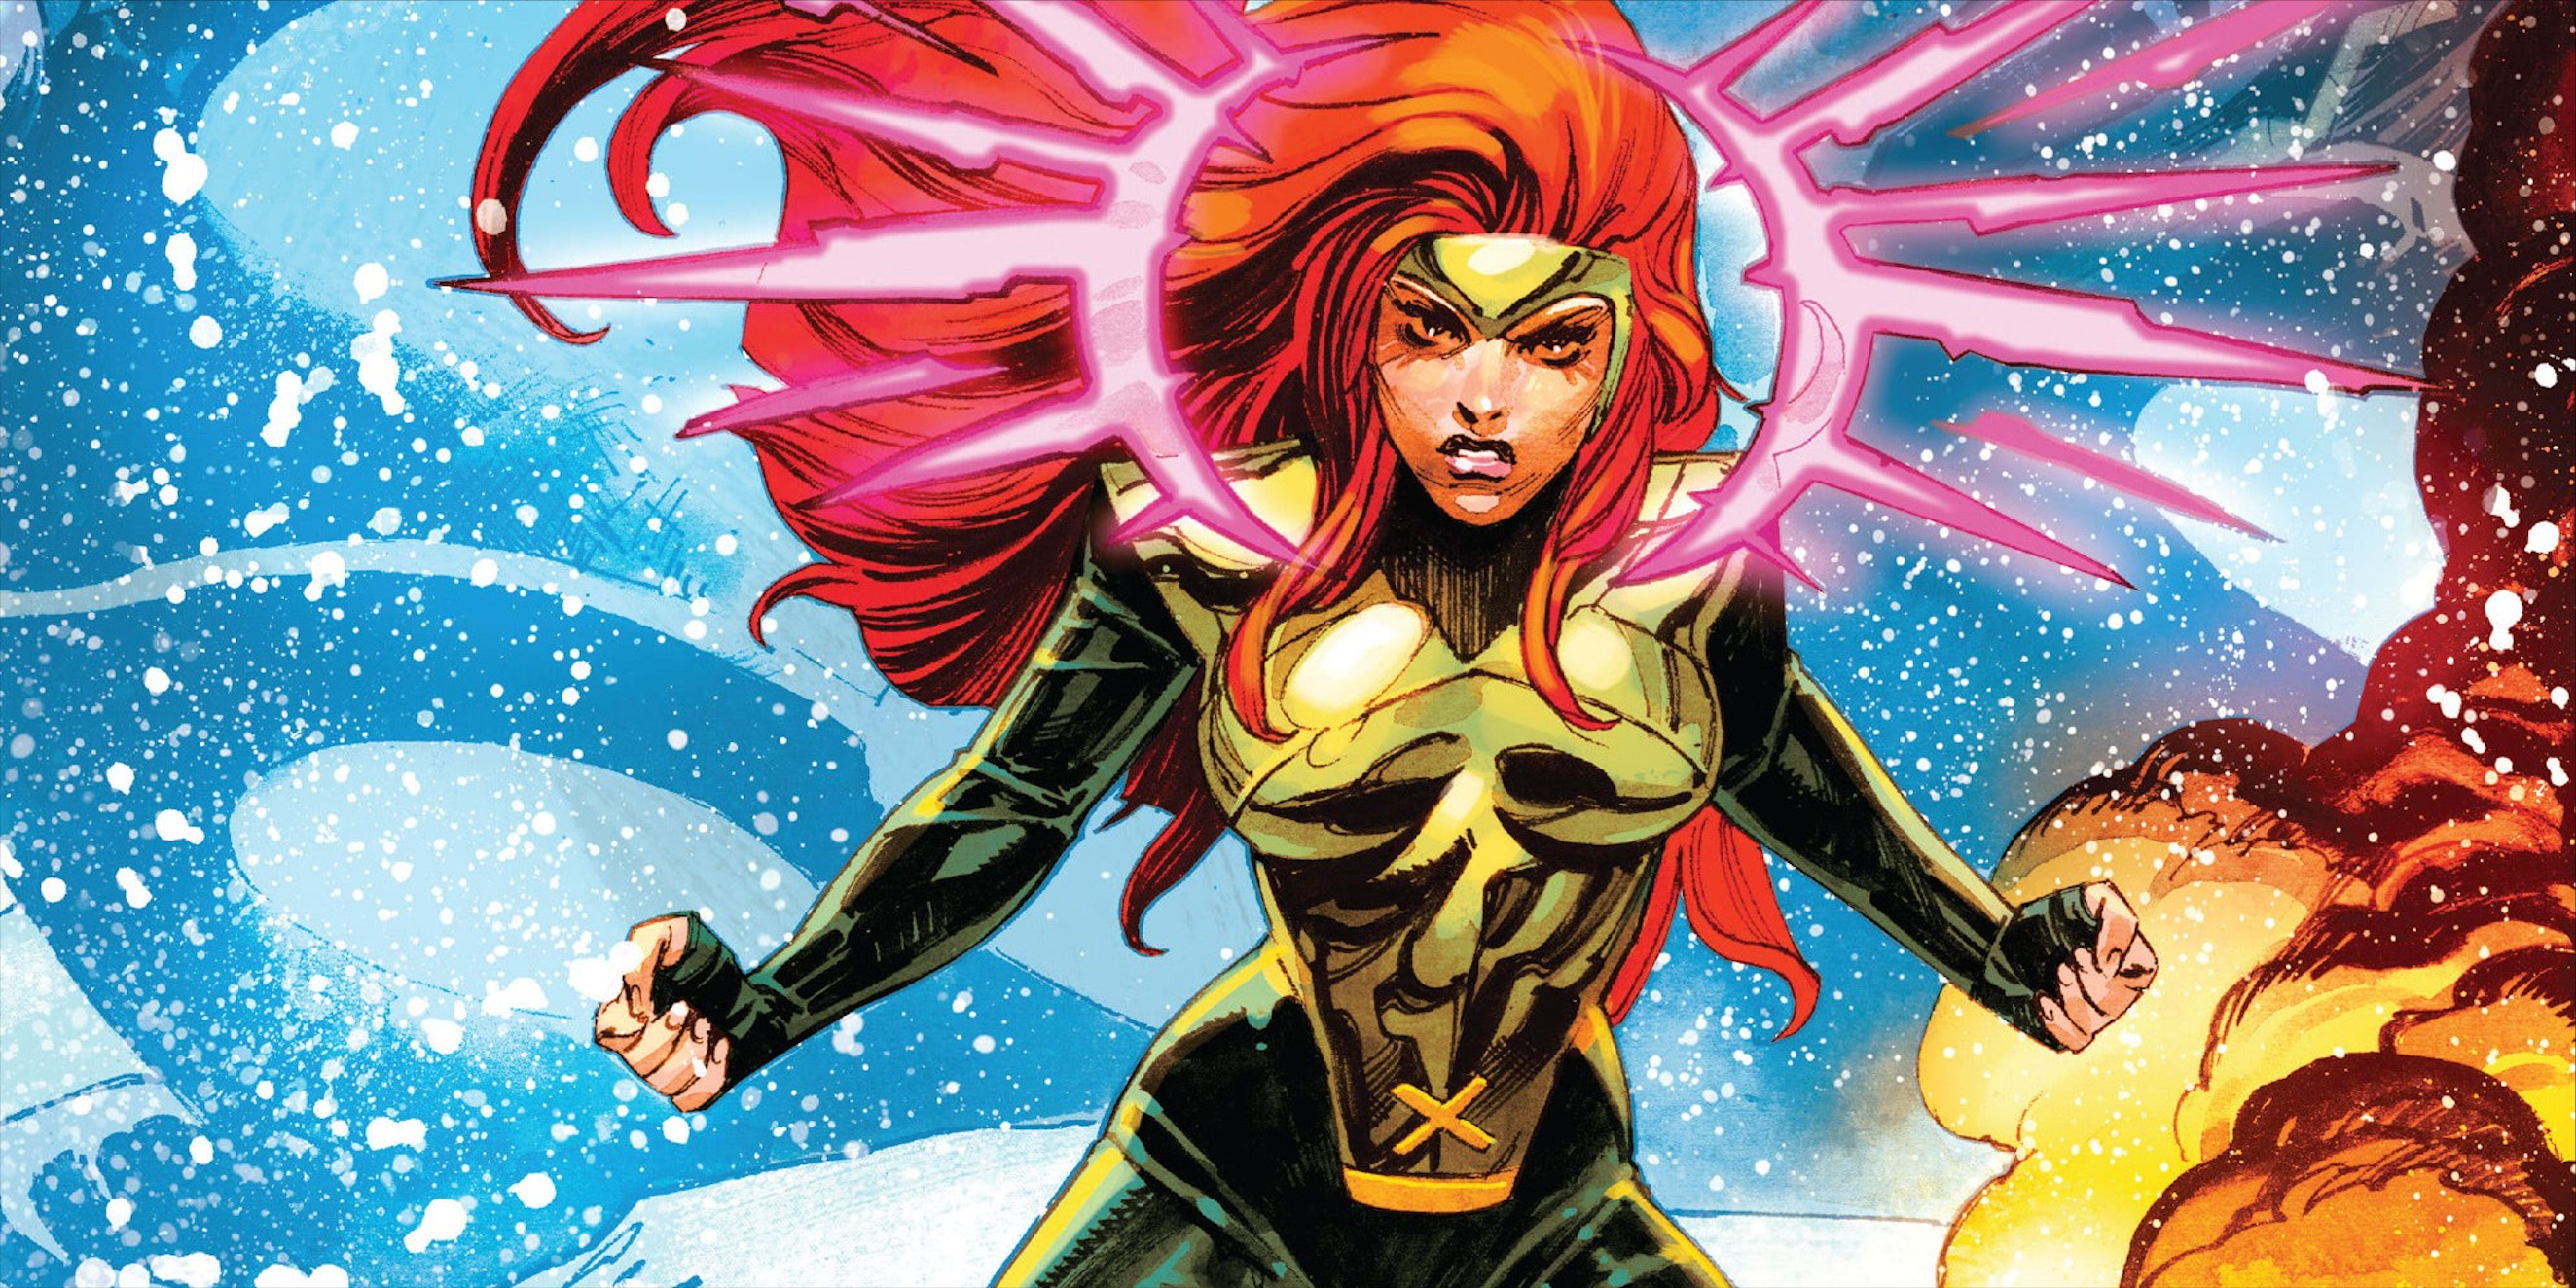 Jean Grey is tested in X-Men